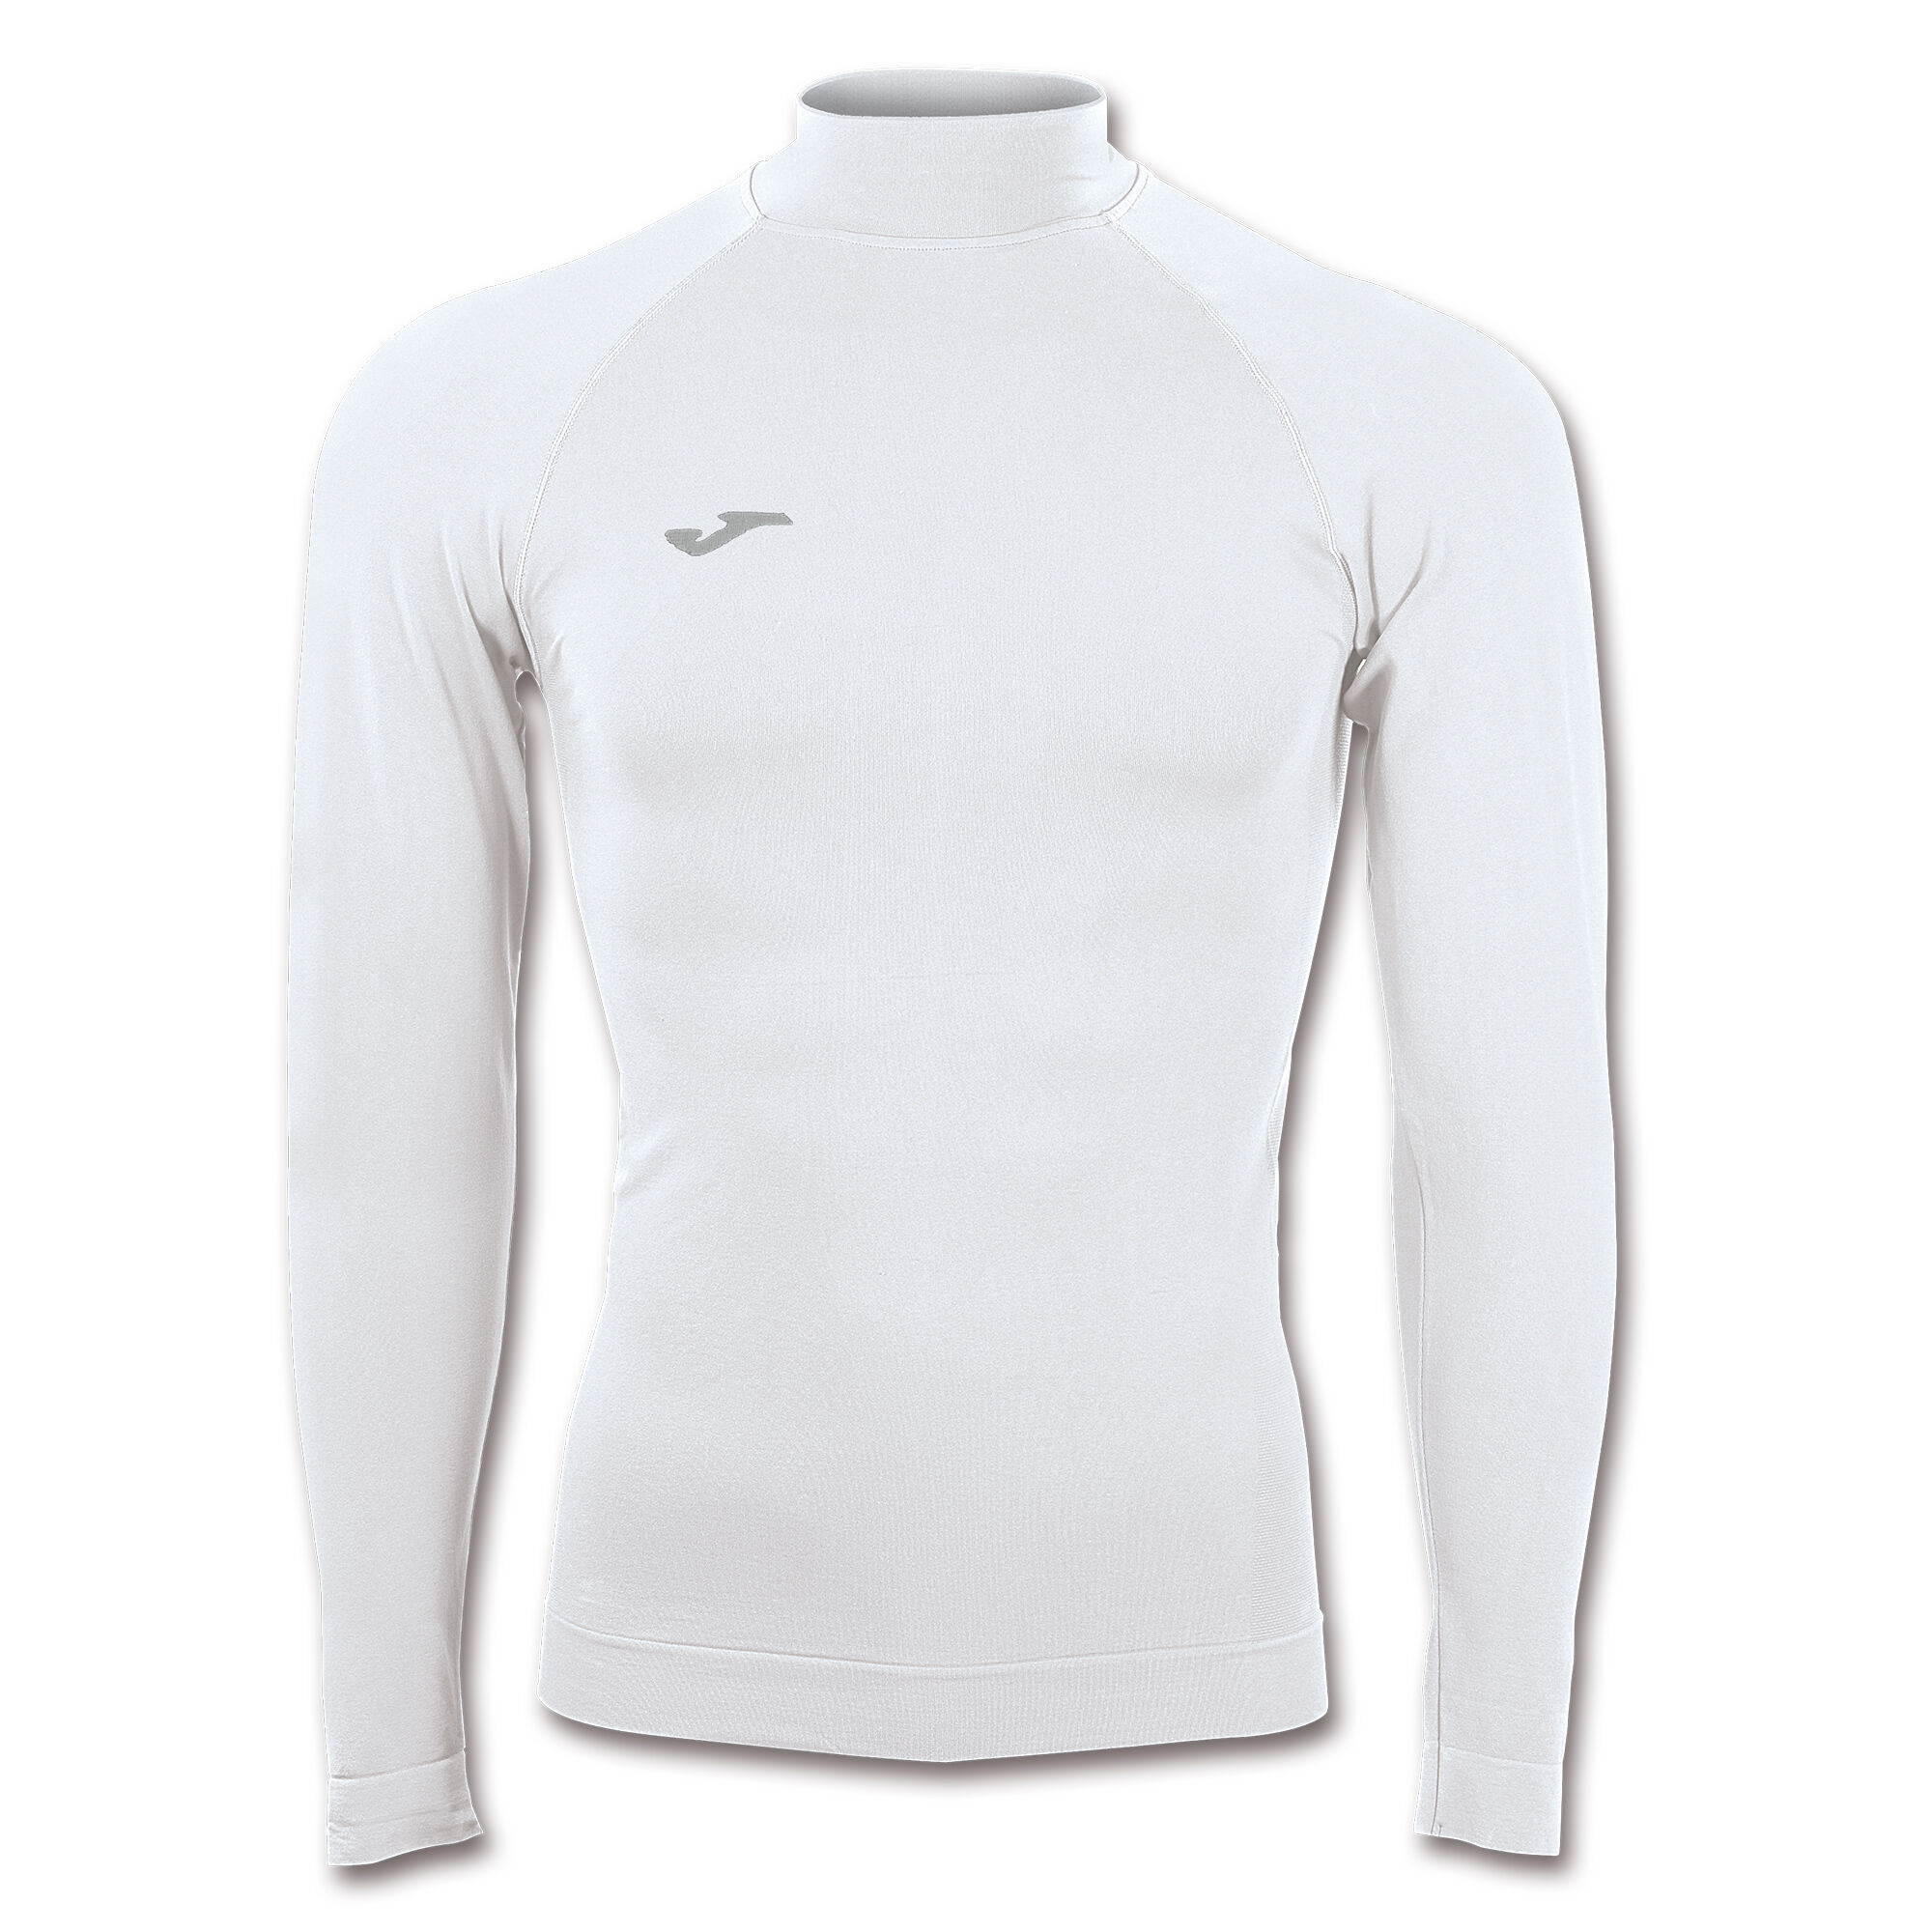 JOMA BRAMA ACADEMY COMPRESSION SKIN THERMAL TOP BASE LAYER MENS BOYS KIDS TOP 